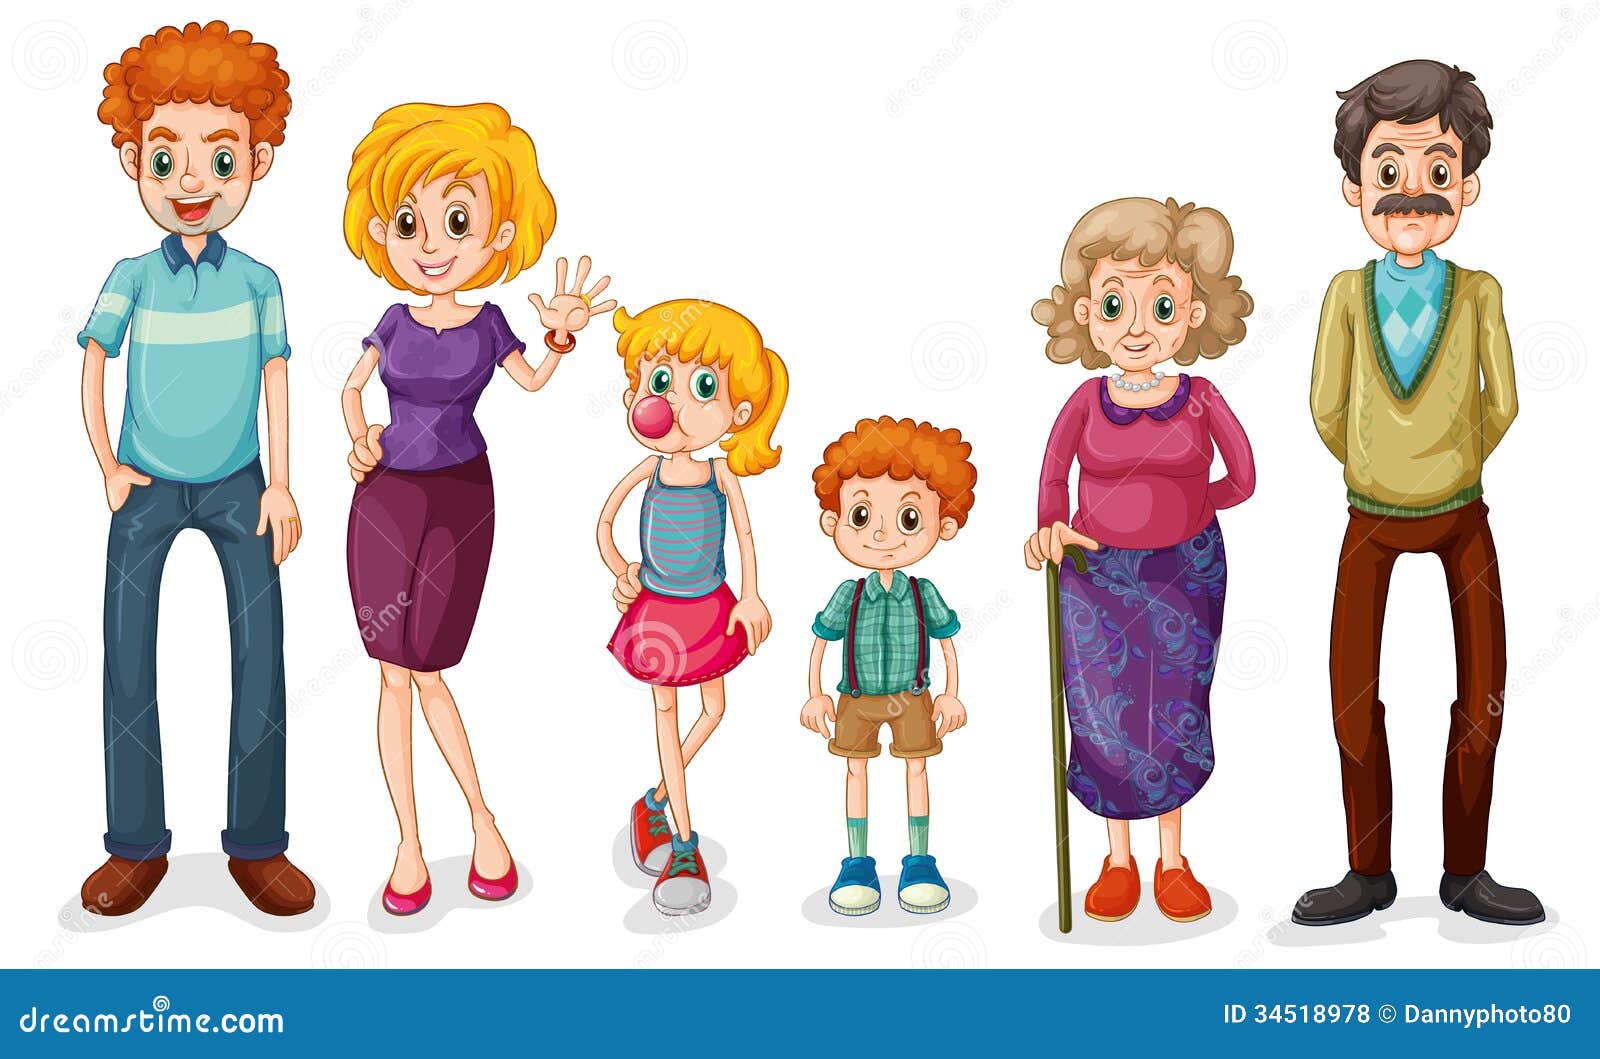 big family clipart images - photo #8